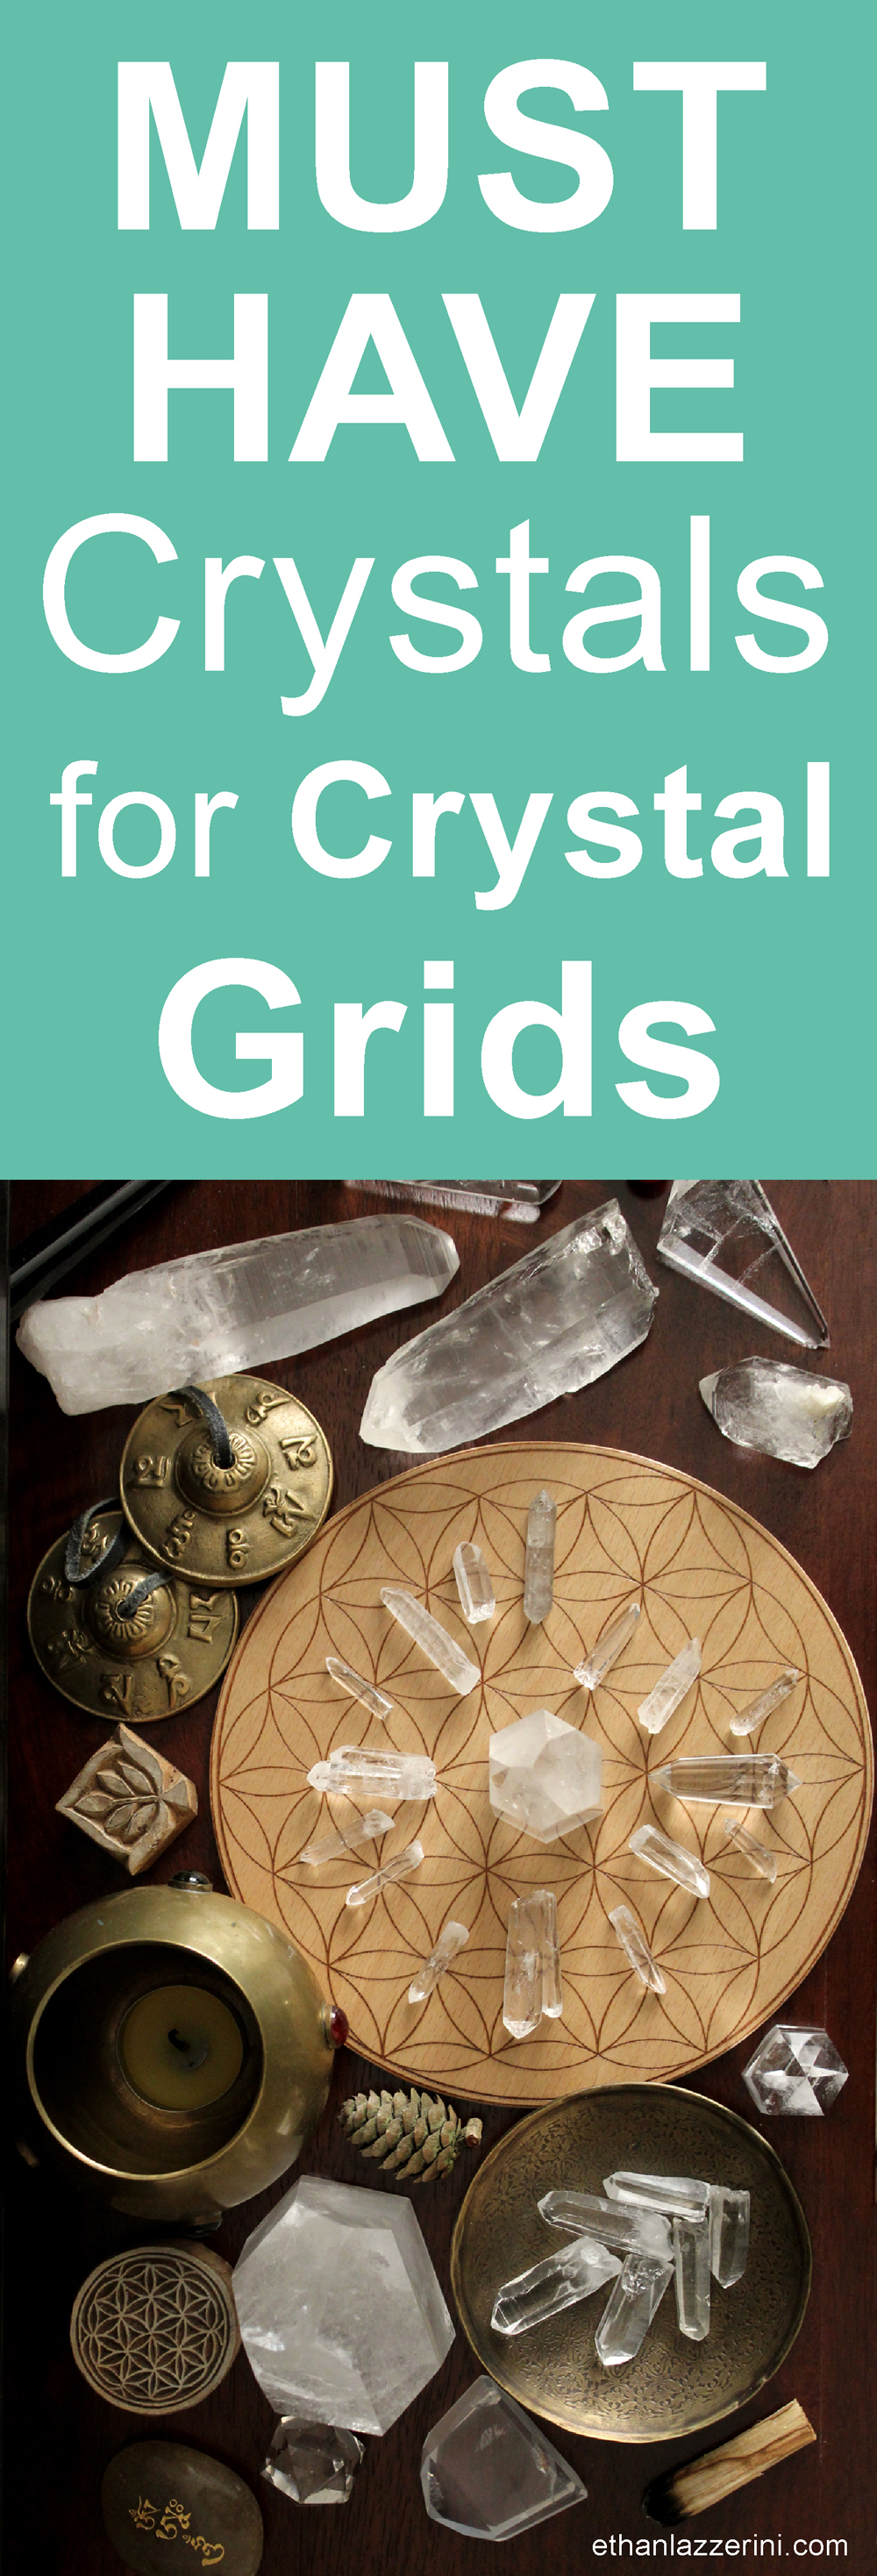 Must have crystals for Crystal Grids